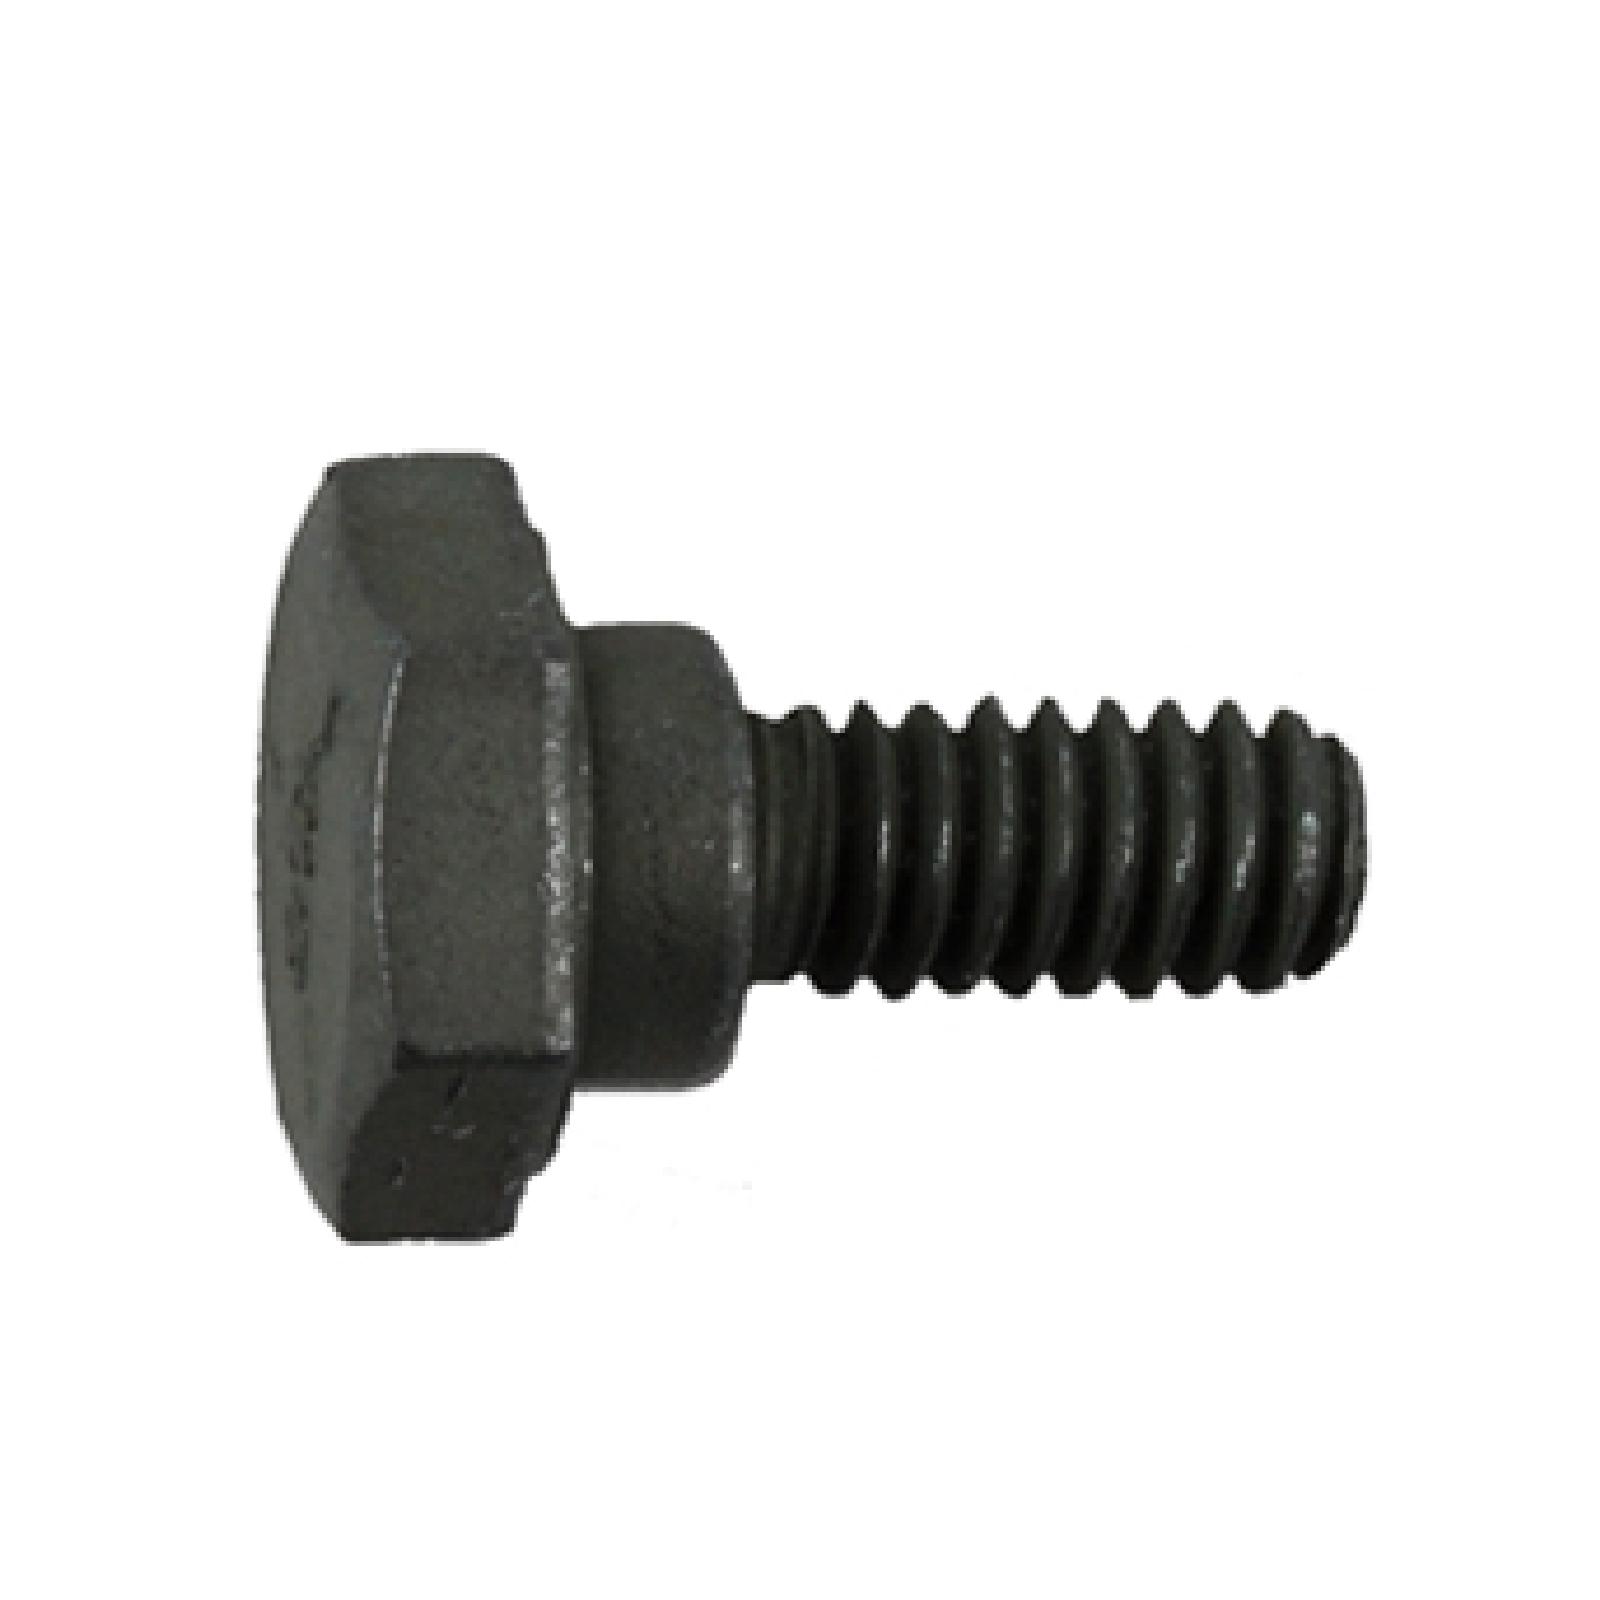 SCREW SHOULDER part# 738-04419A by MTD